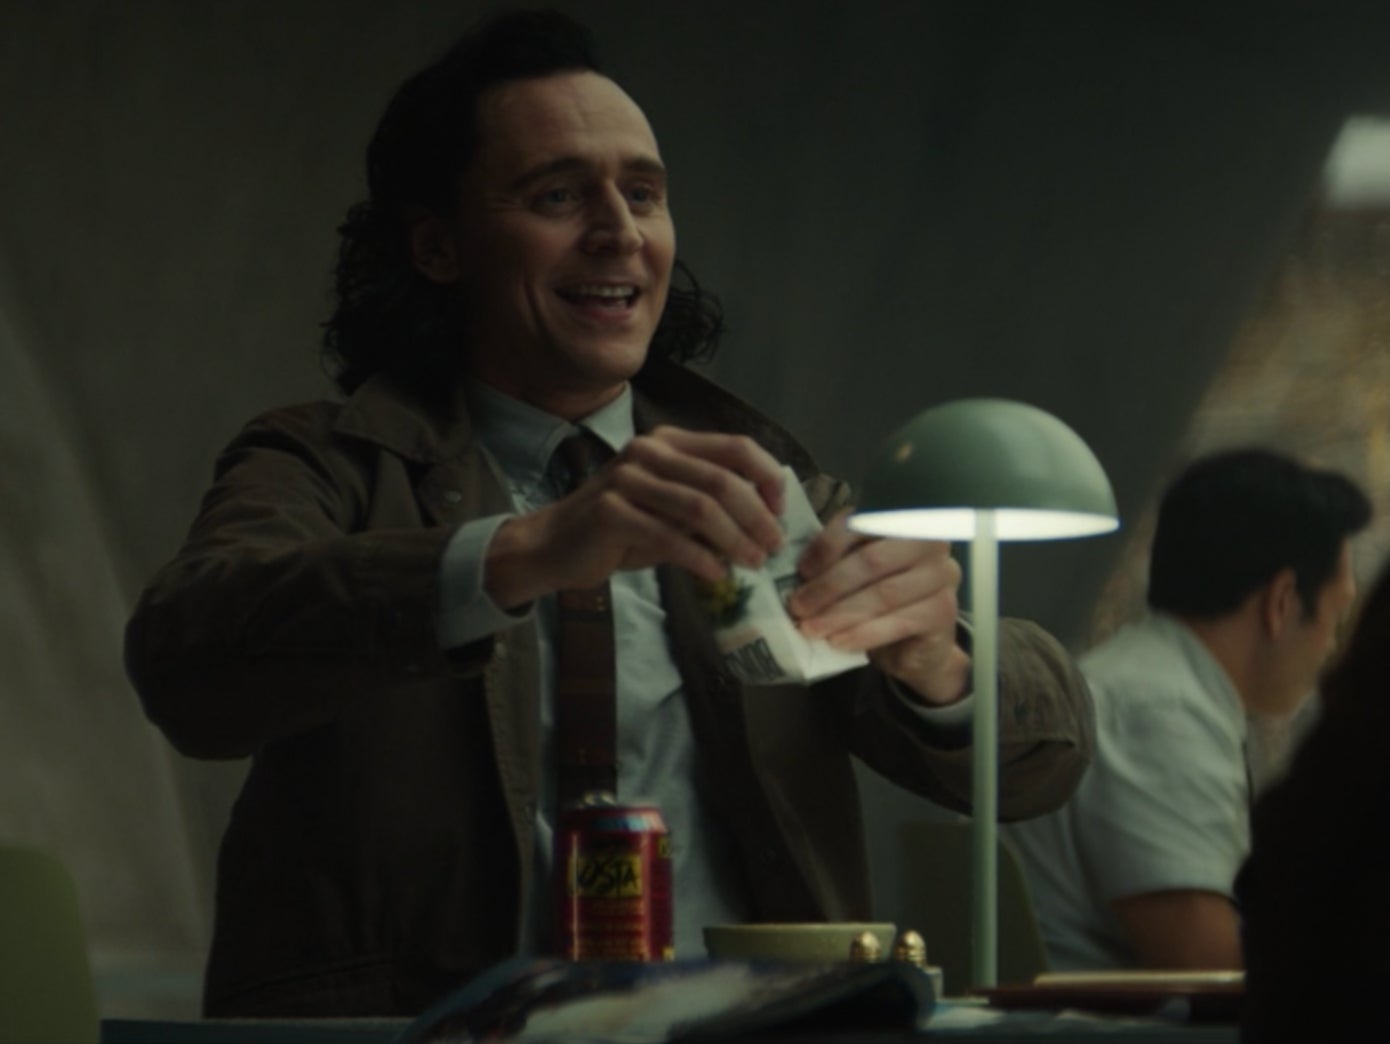 Tom Hiddleston in ‘The Variant’, the second episode of ‘Loki'